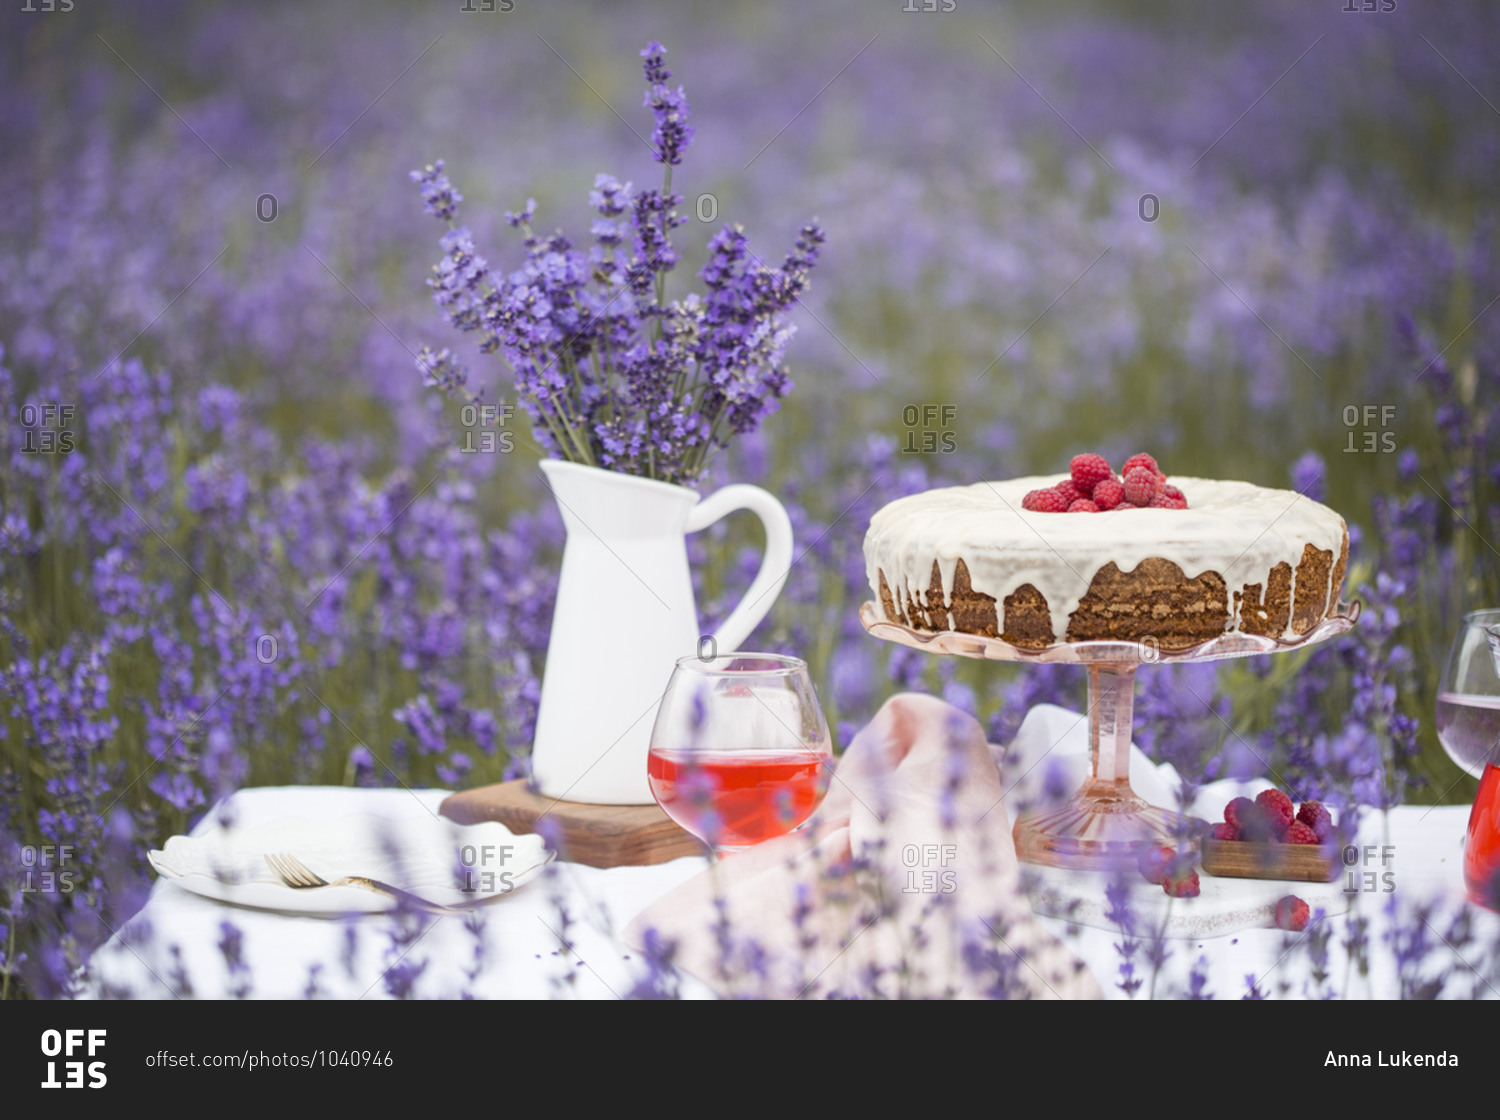 Fresh baked carrot cake with raspberries on the table in a lavender field